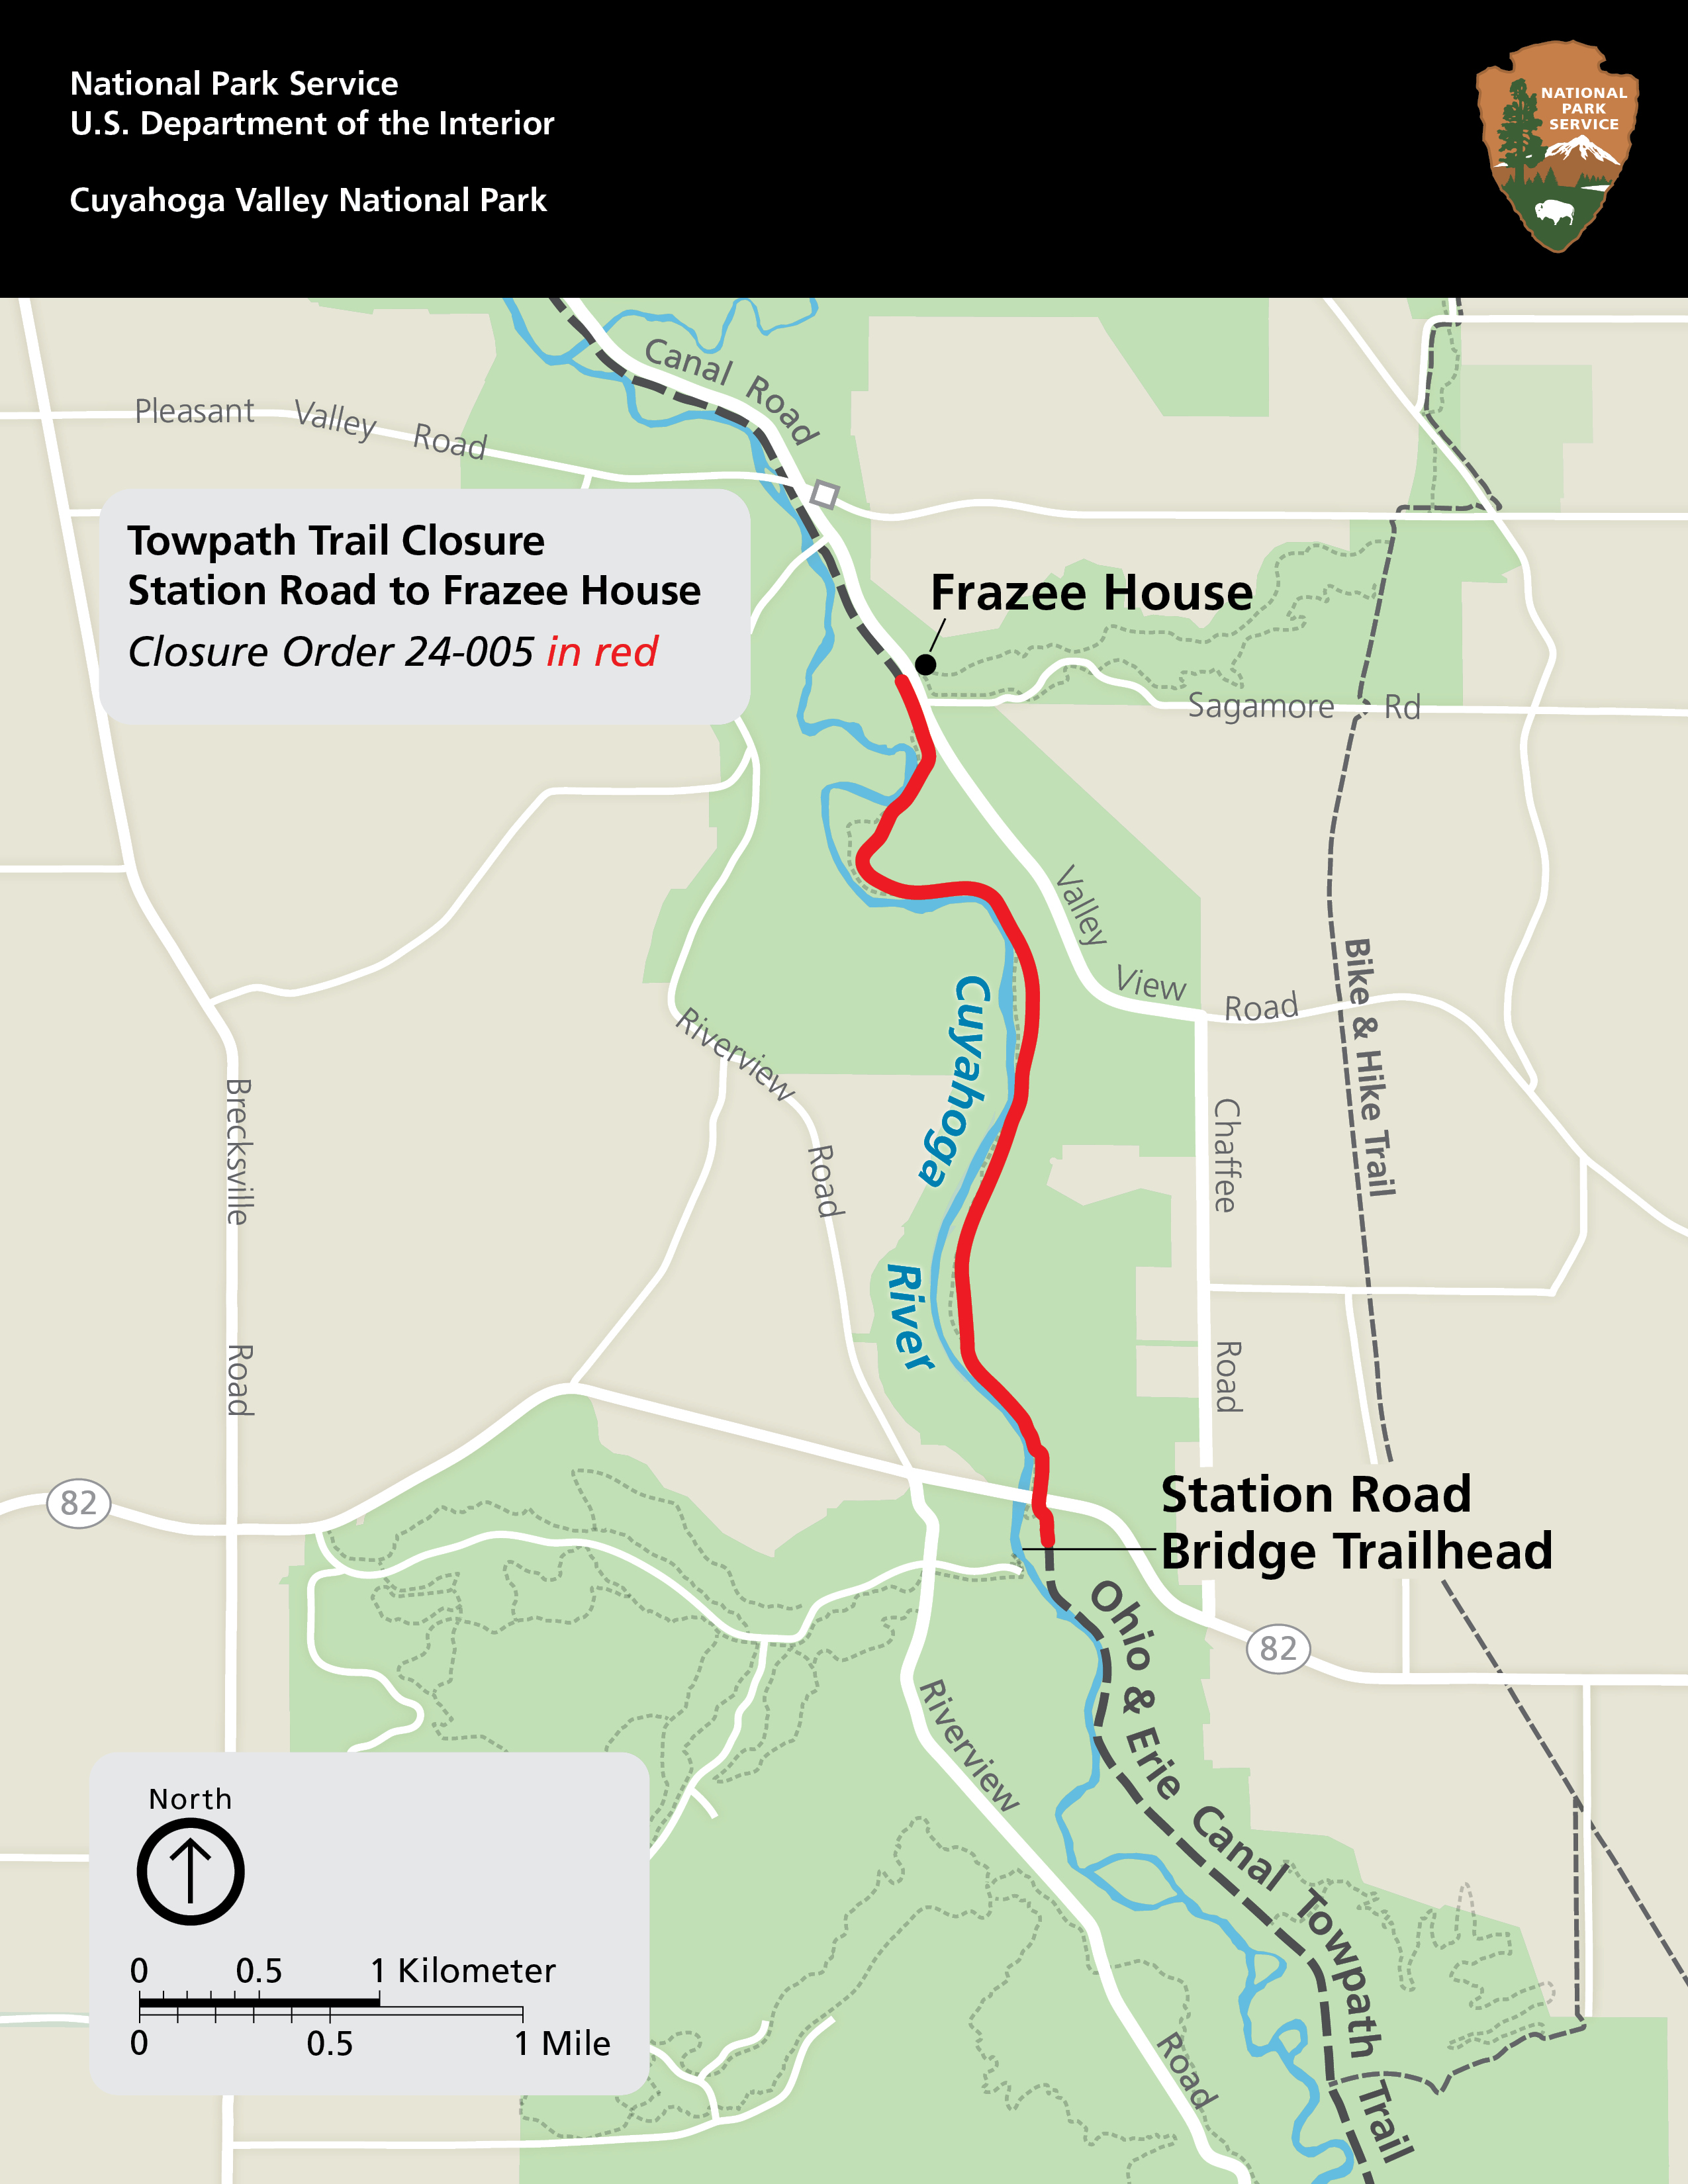 Map of section of park and surrounding area; closure of Towpath shown in red; black bar at top with NPS arrowhead symbol.